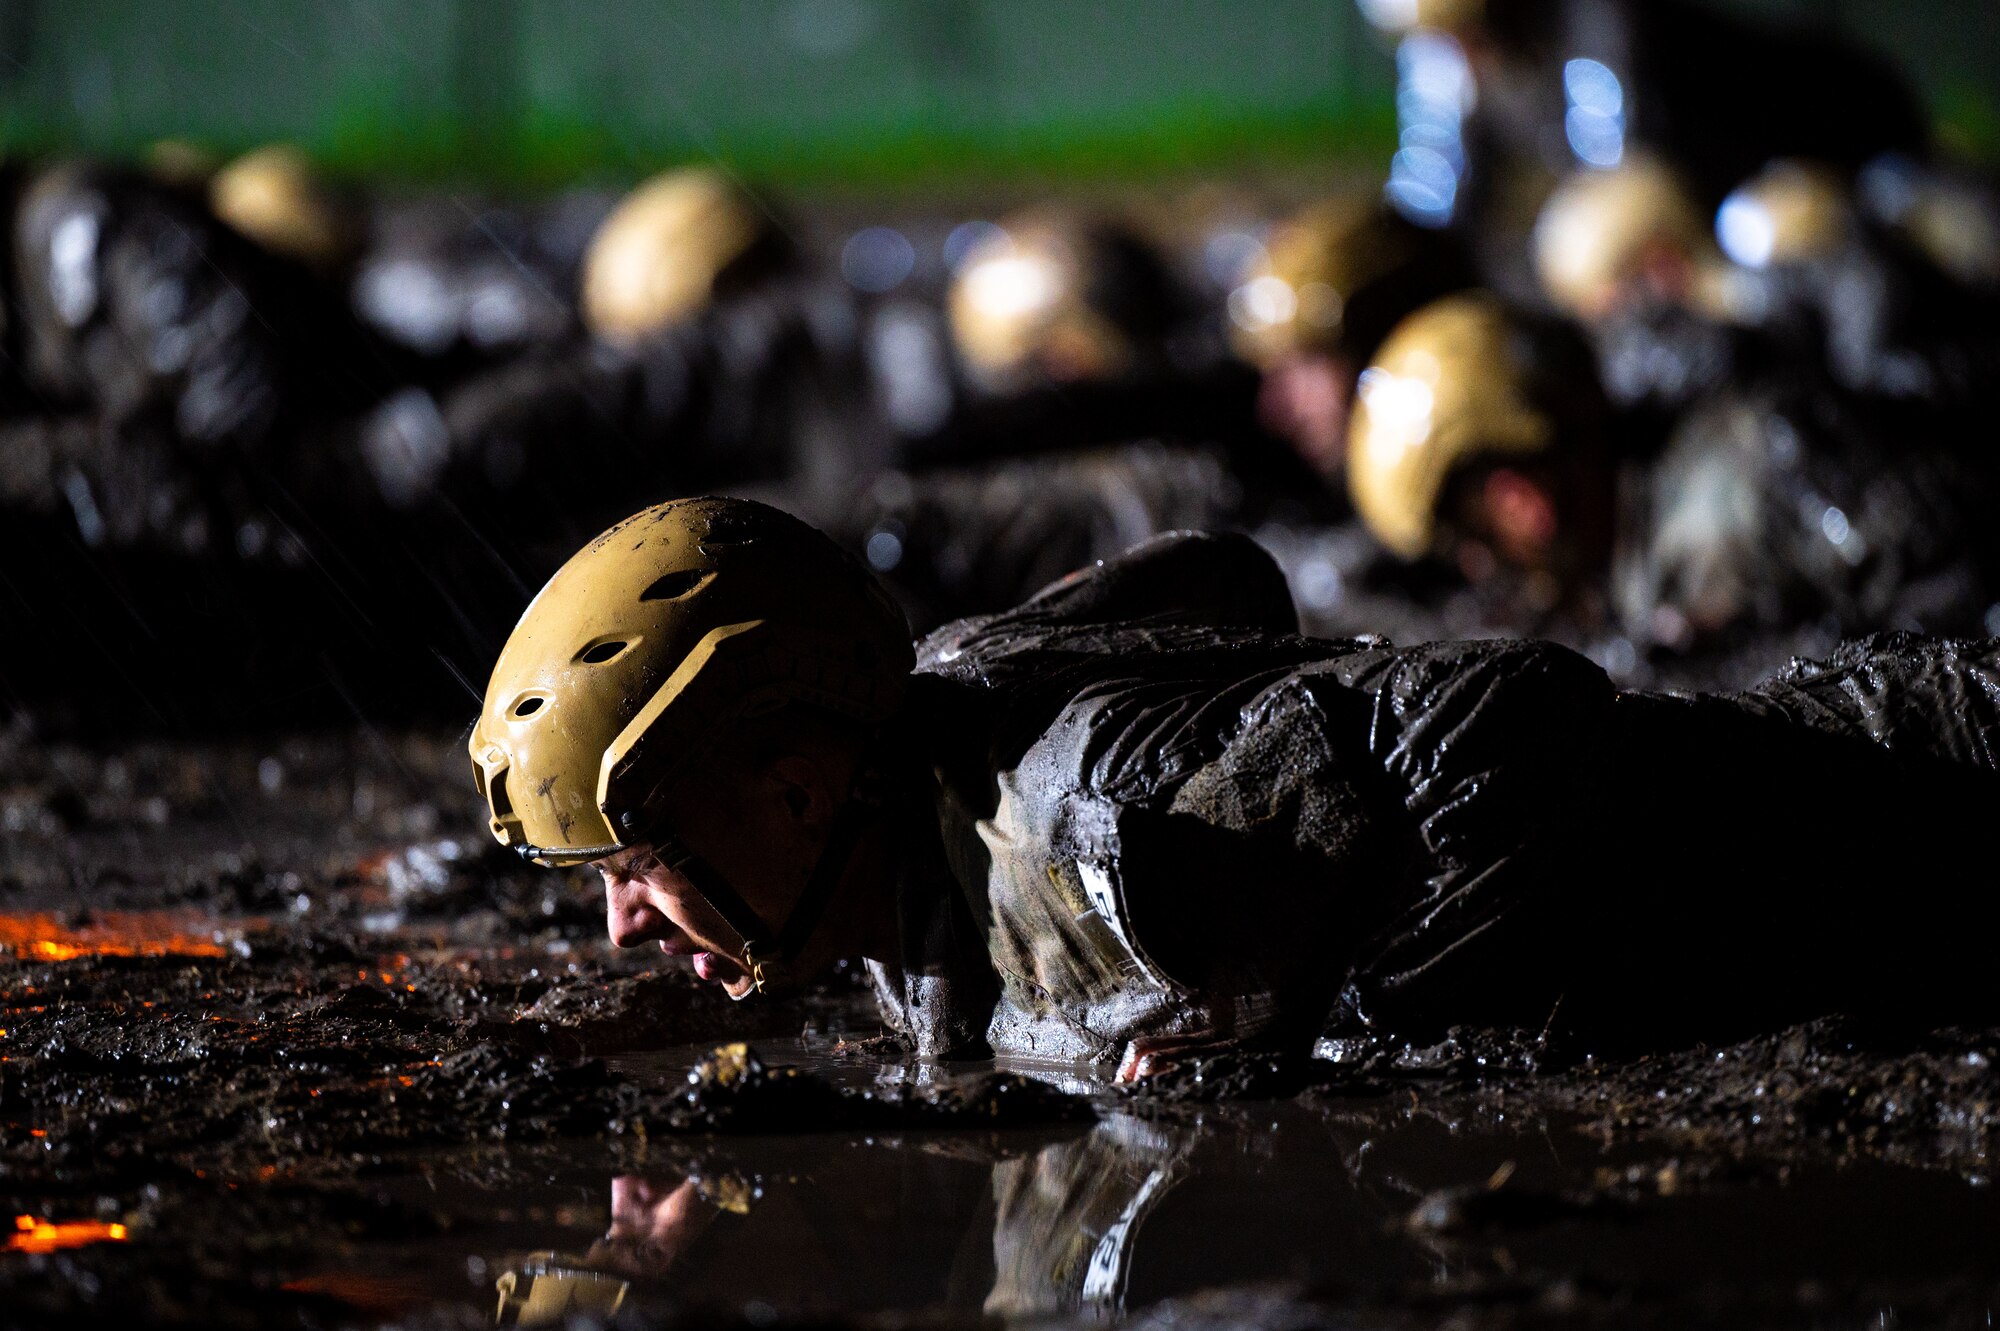 Trainees in bright yellow helmets complete pushups in the mud while it rains